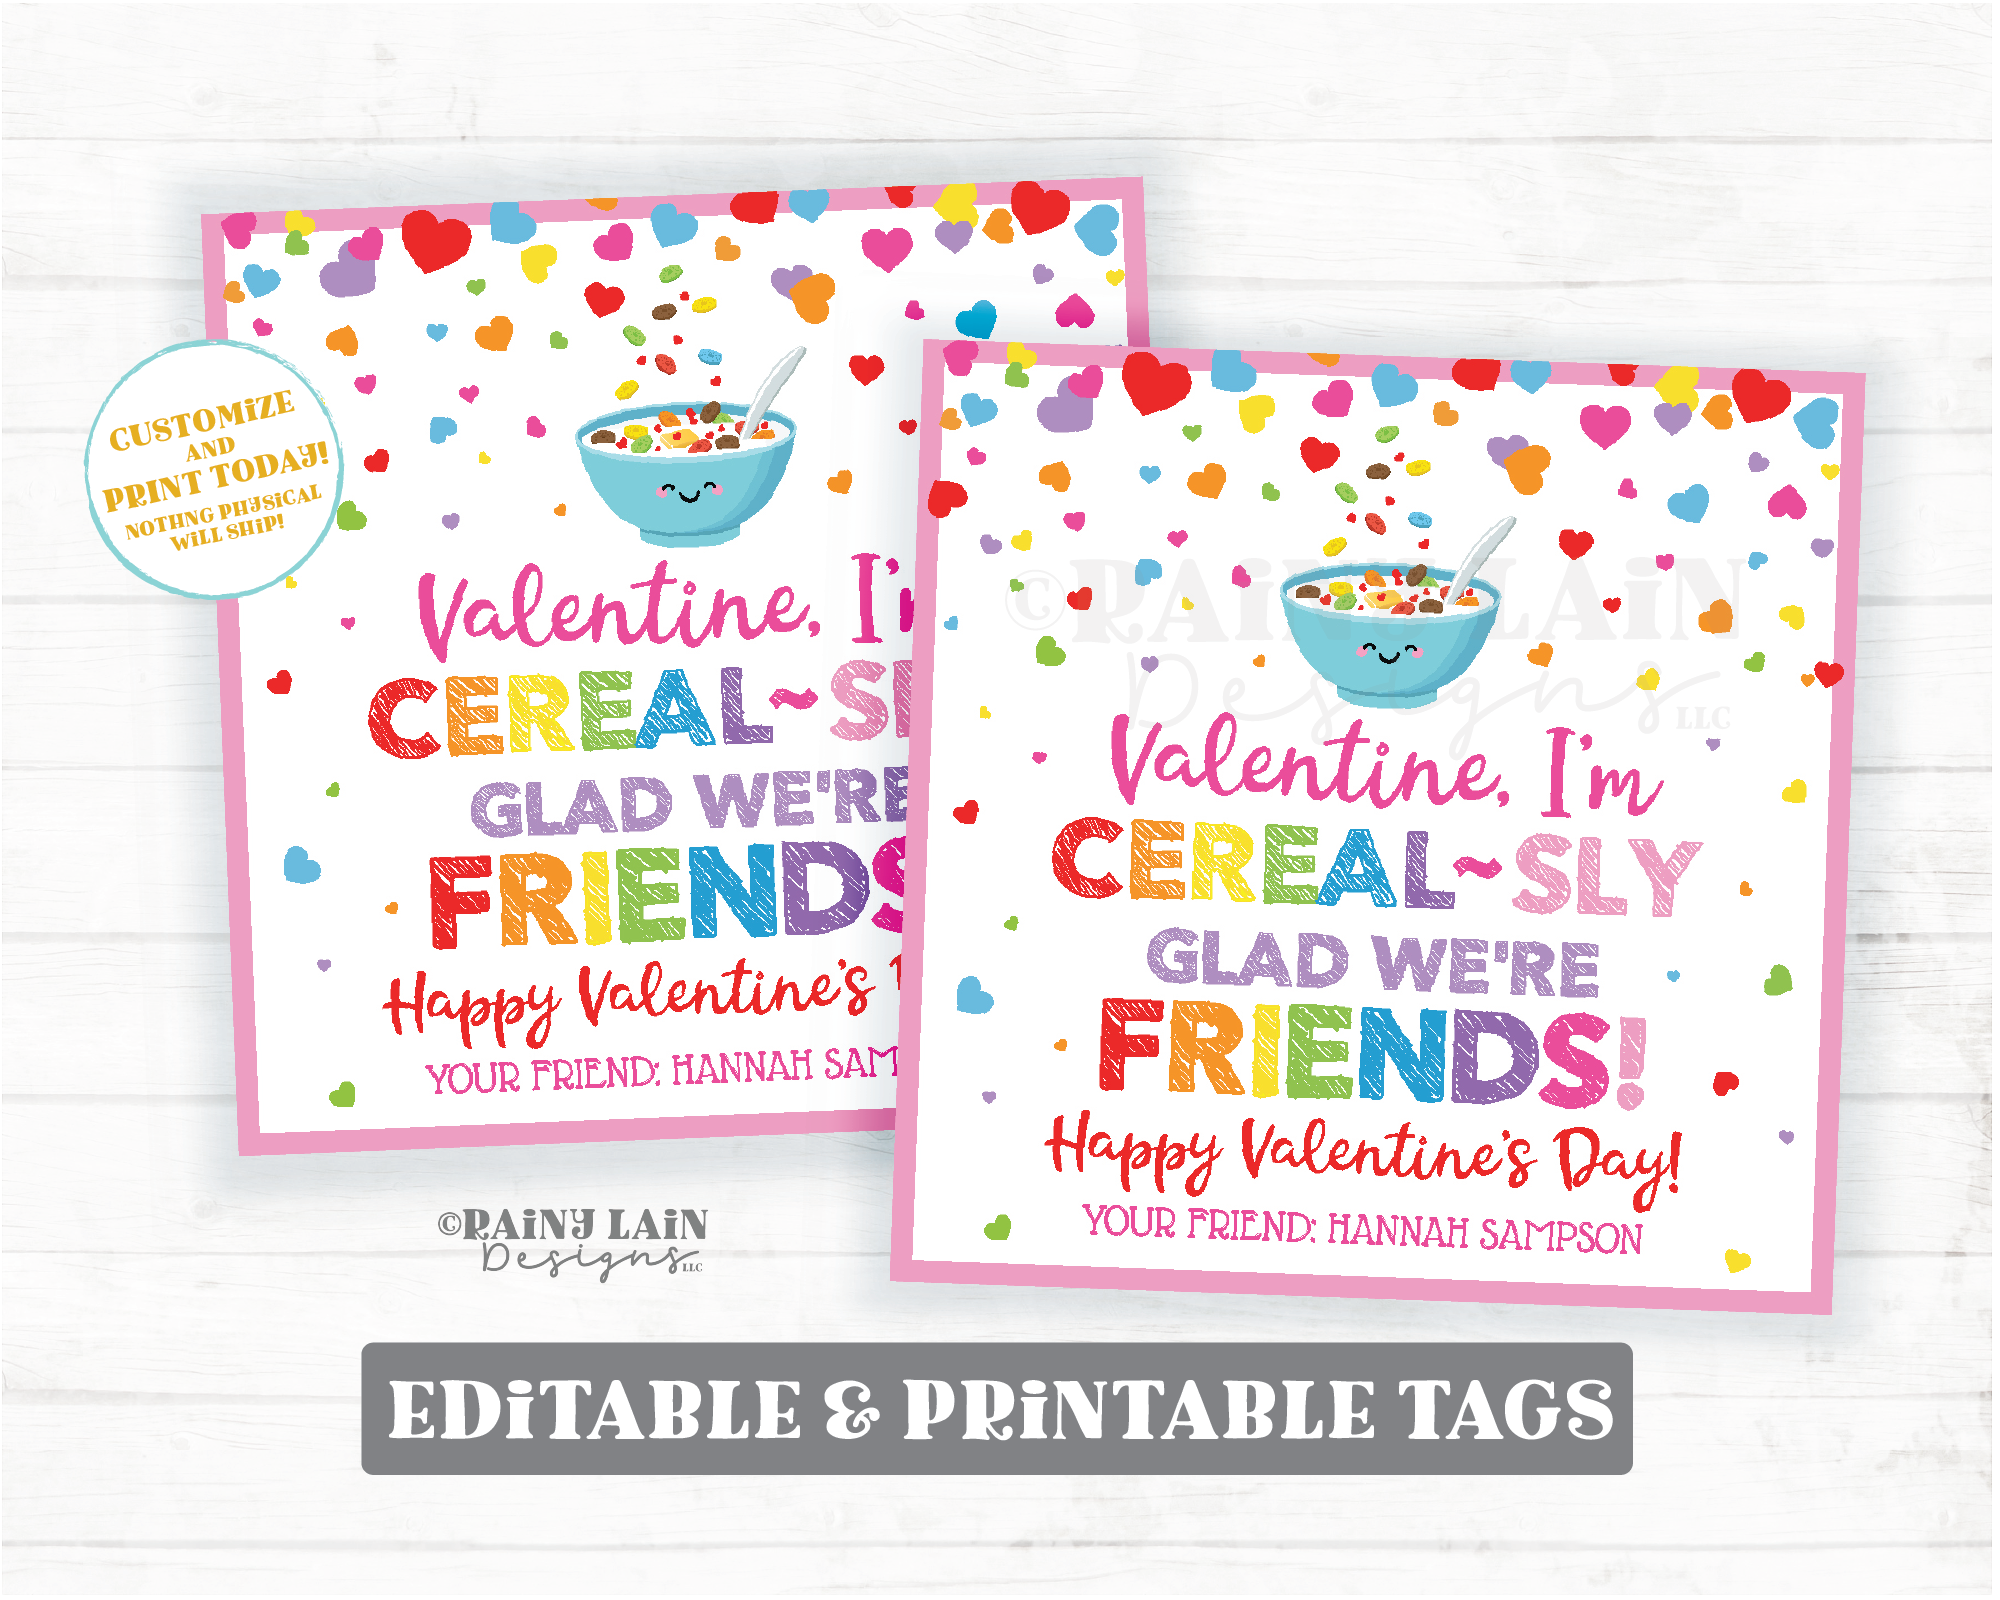 Cereal-sly Glad We're Friends Valentine Cereal Valentine Cereal Gift Classroom Preschool Kids Easy Printable Editable Non-Candy Valentine